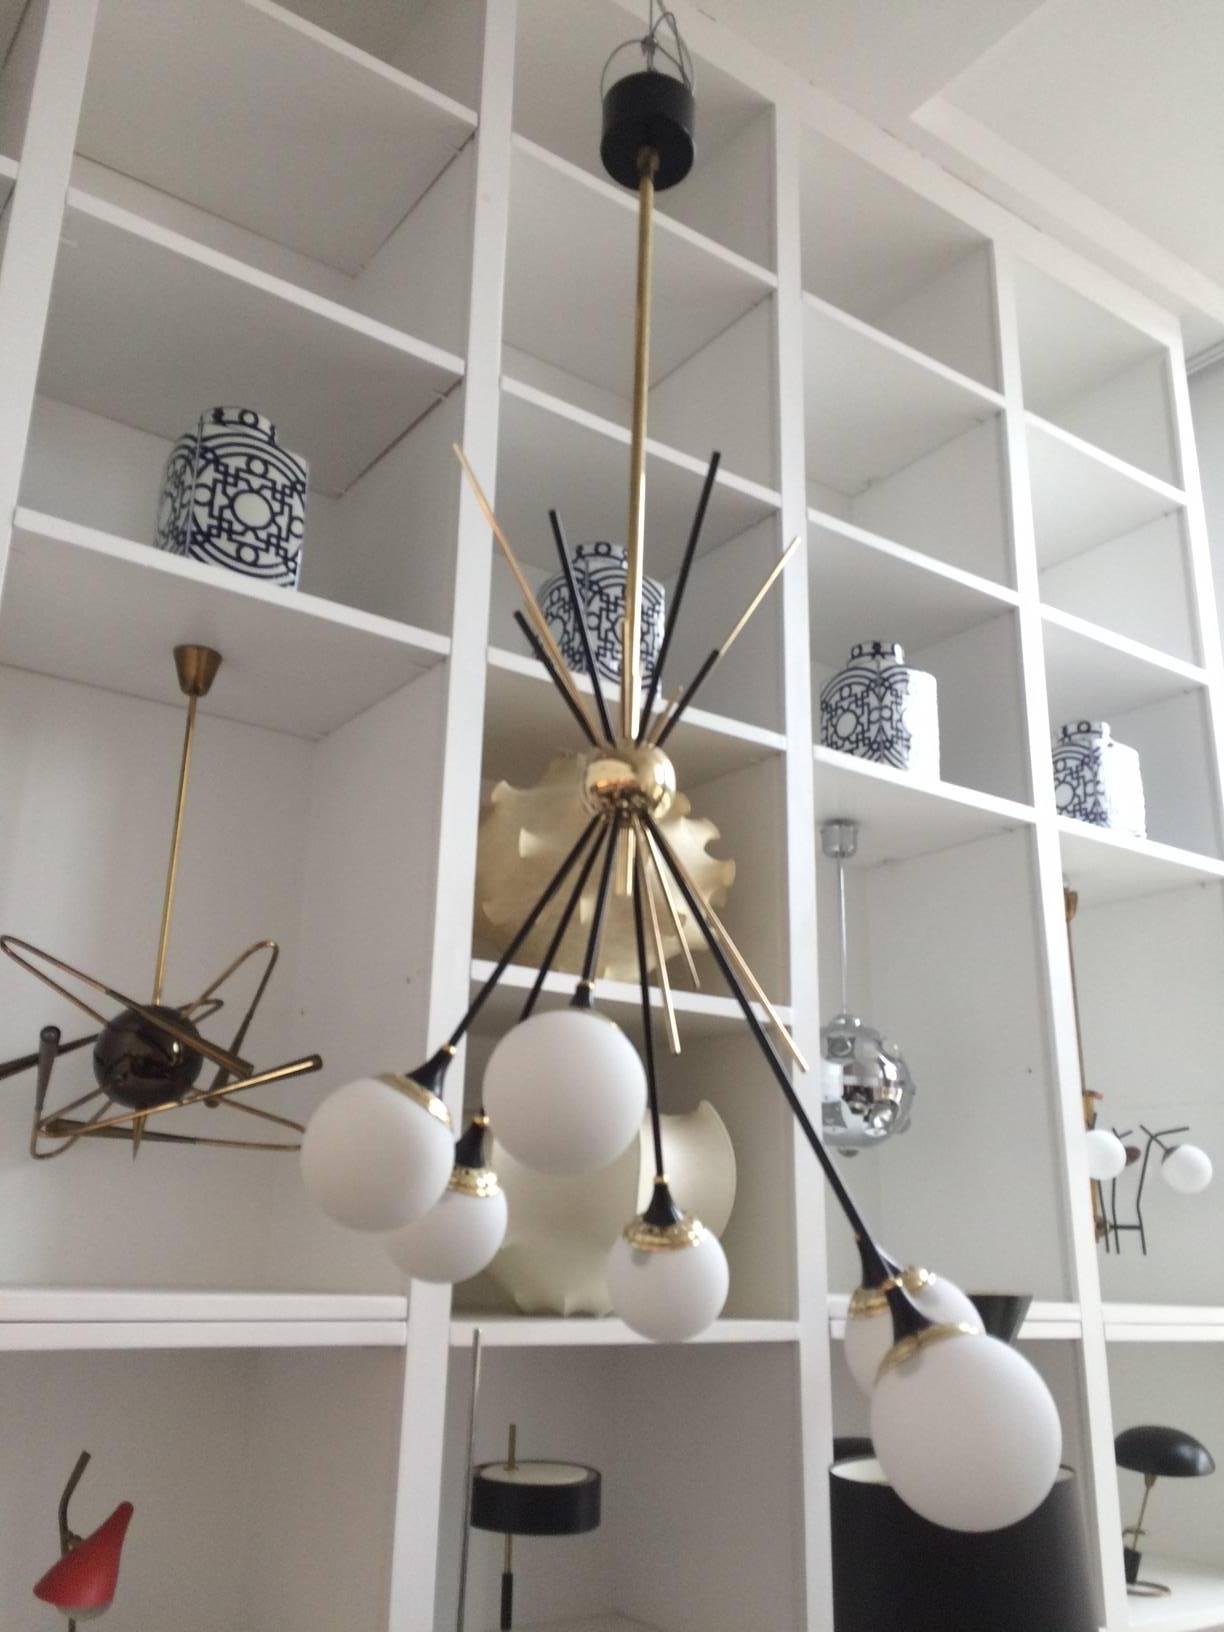 This chandelier has six lights on black enameled stems and six handblown globes that transept the center brass globe clustering the lights in an asymmetric dramatic arrangement.